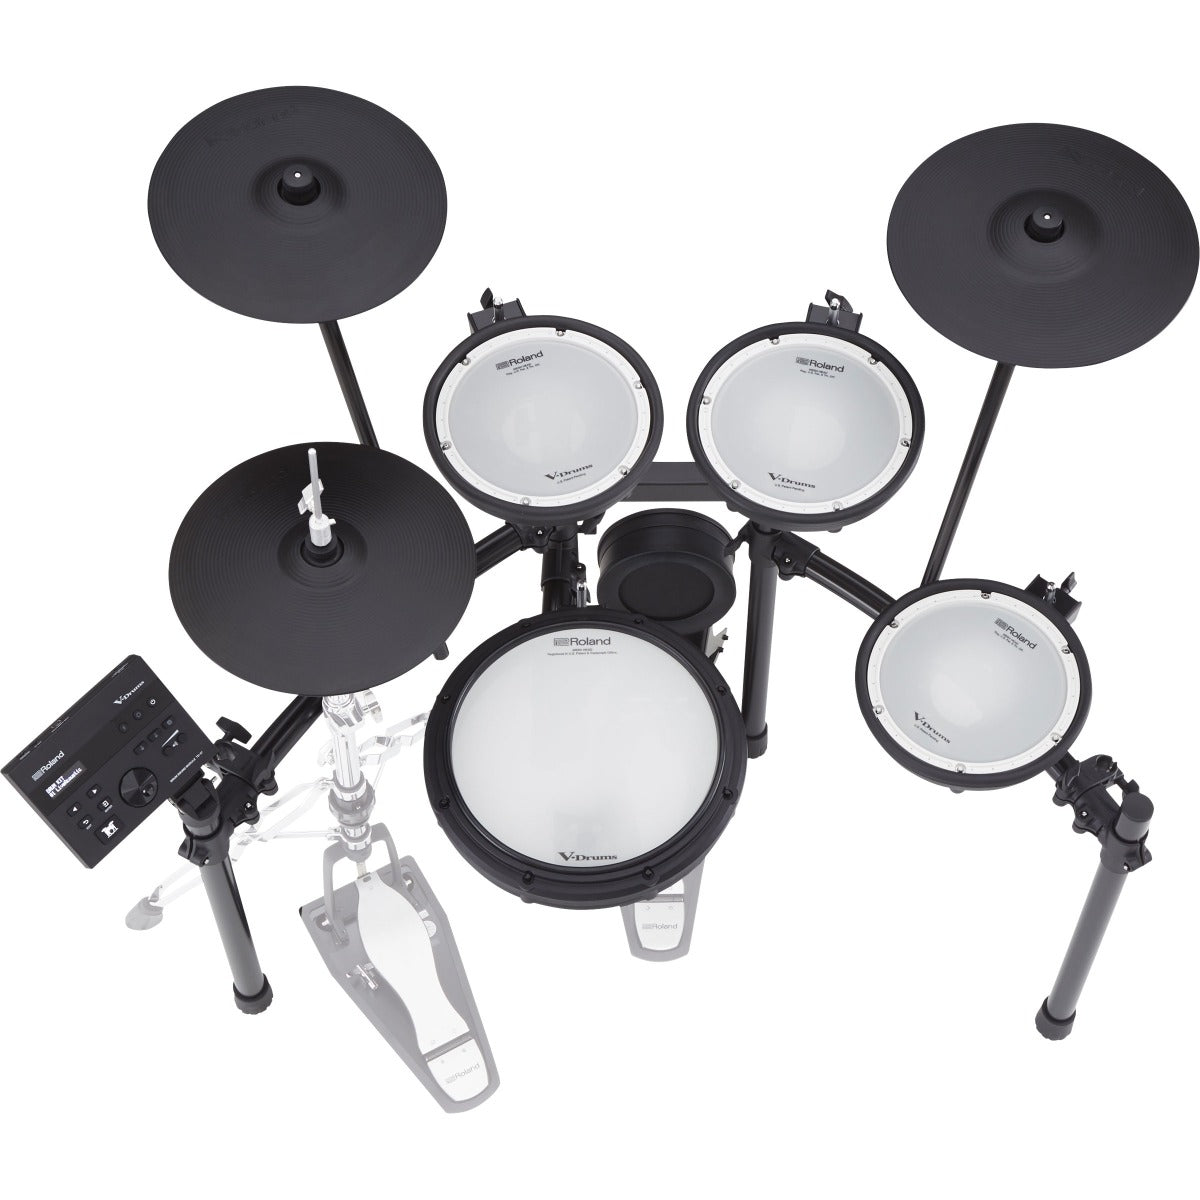 Perspective view of Roland TD-07KVX V-Drums Electronic Drum Set showing top and back